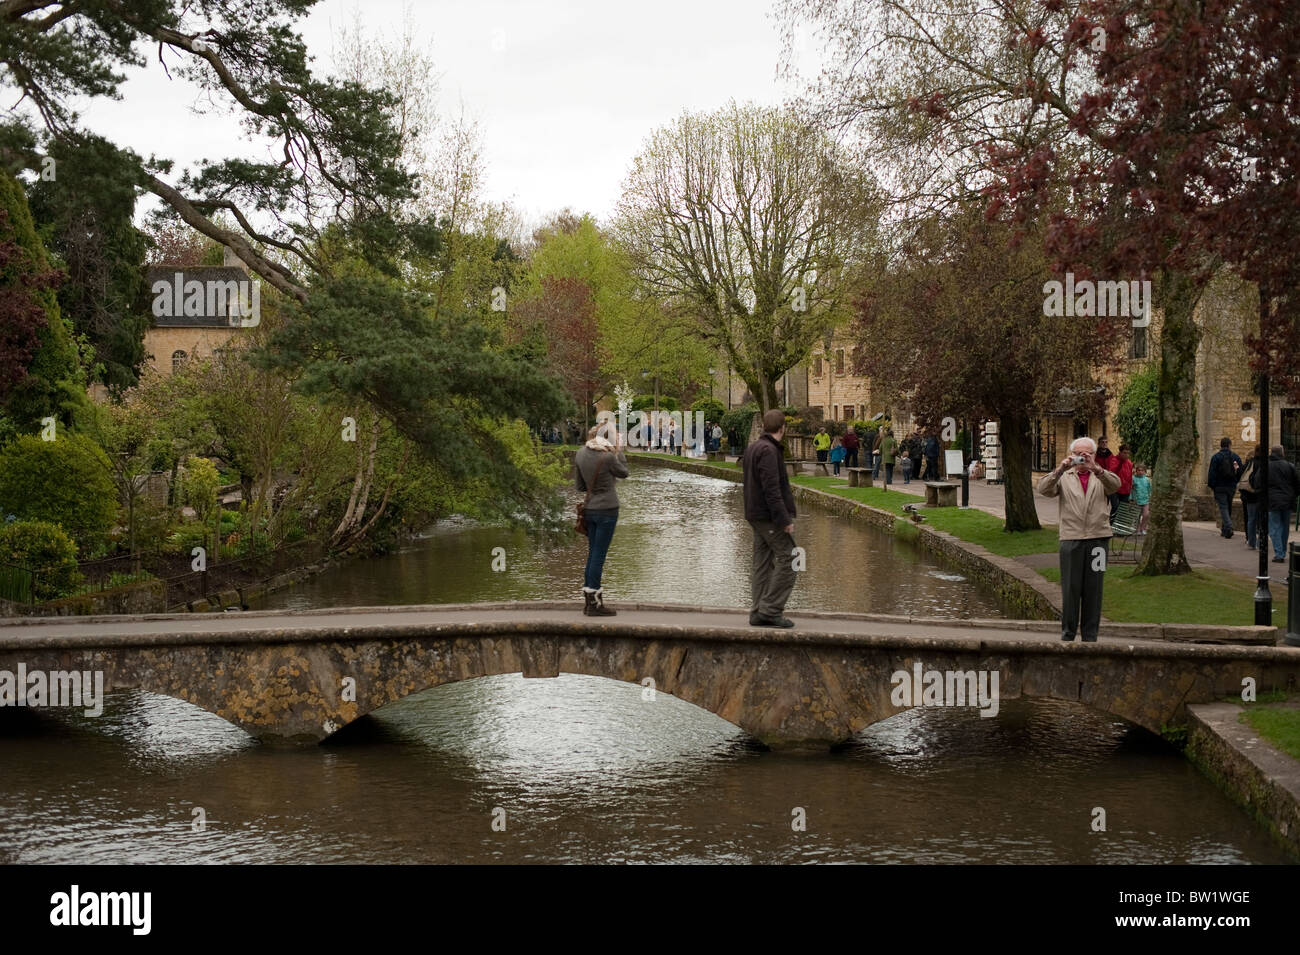 Footbridge over River at Bourton on the Water in the Cotswolds Stock Photo